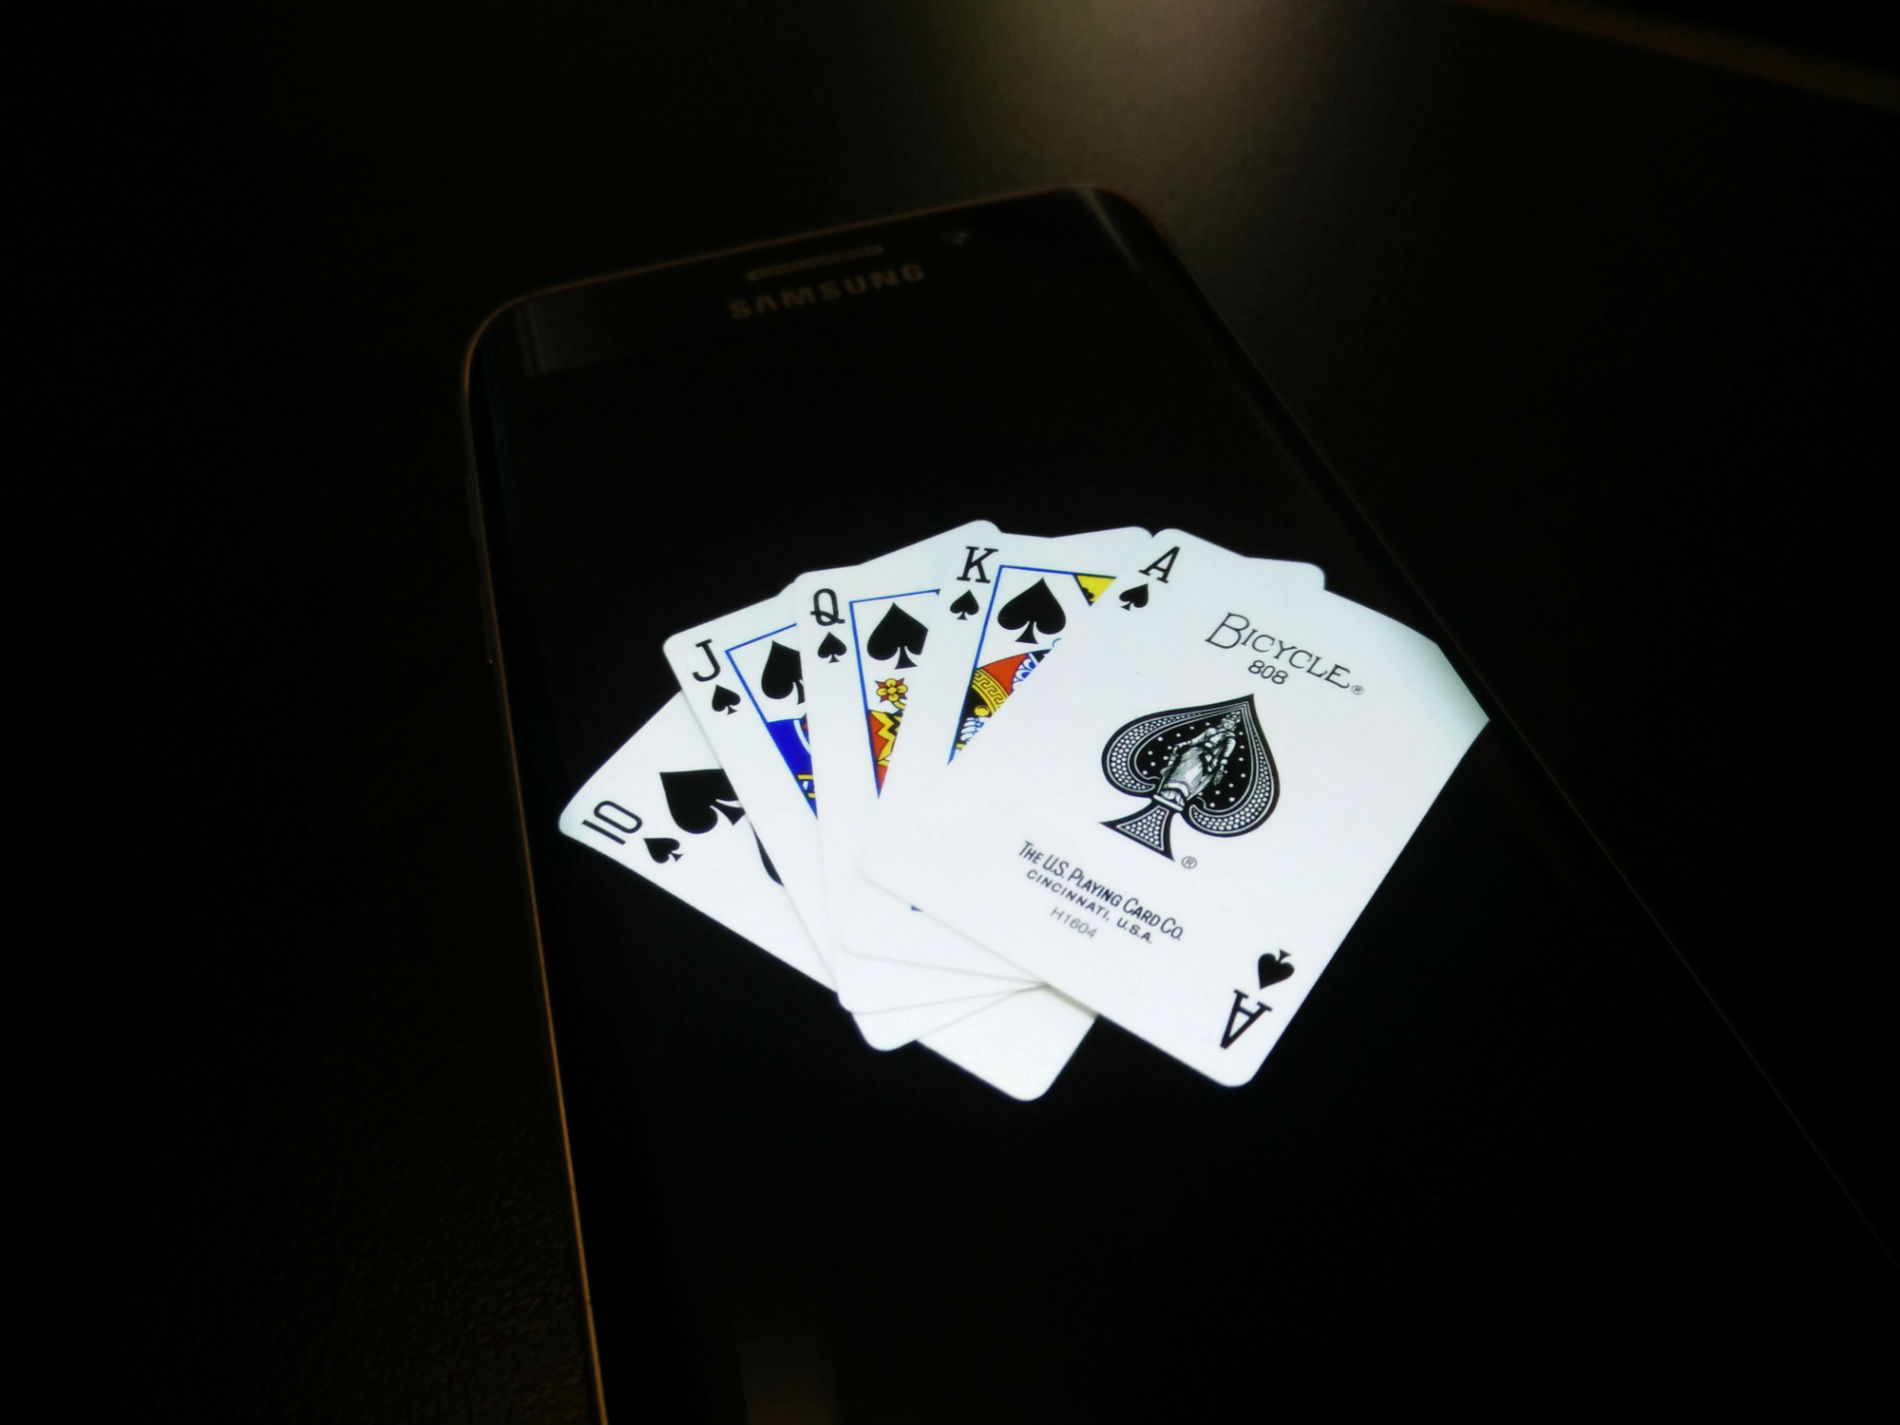 Android Based Poker Compatibility Is Growing, But Still Has Room To Grow In …